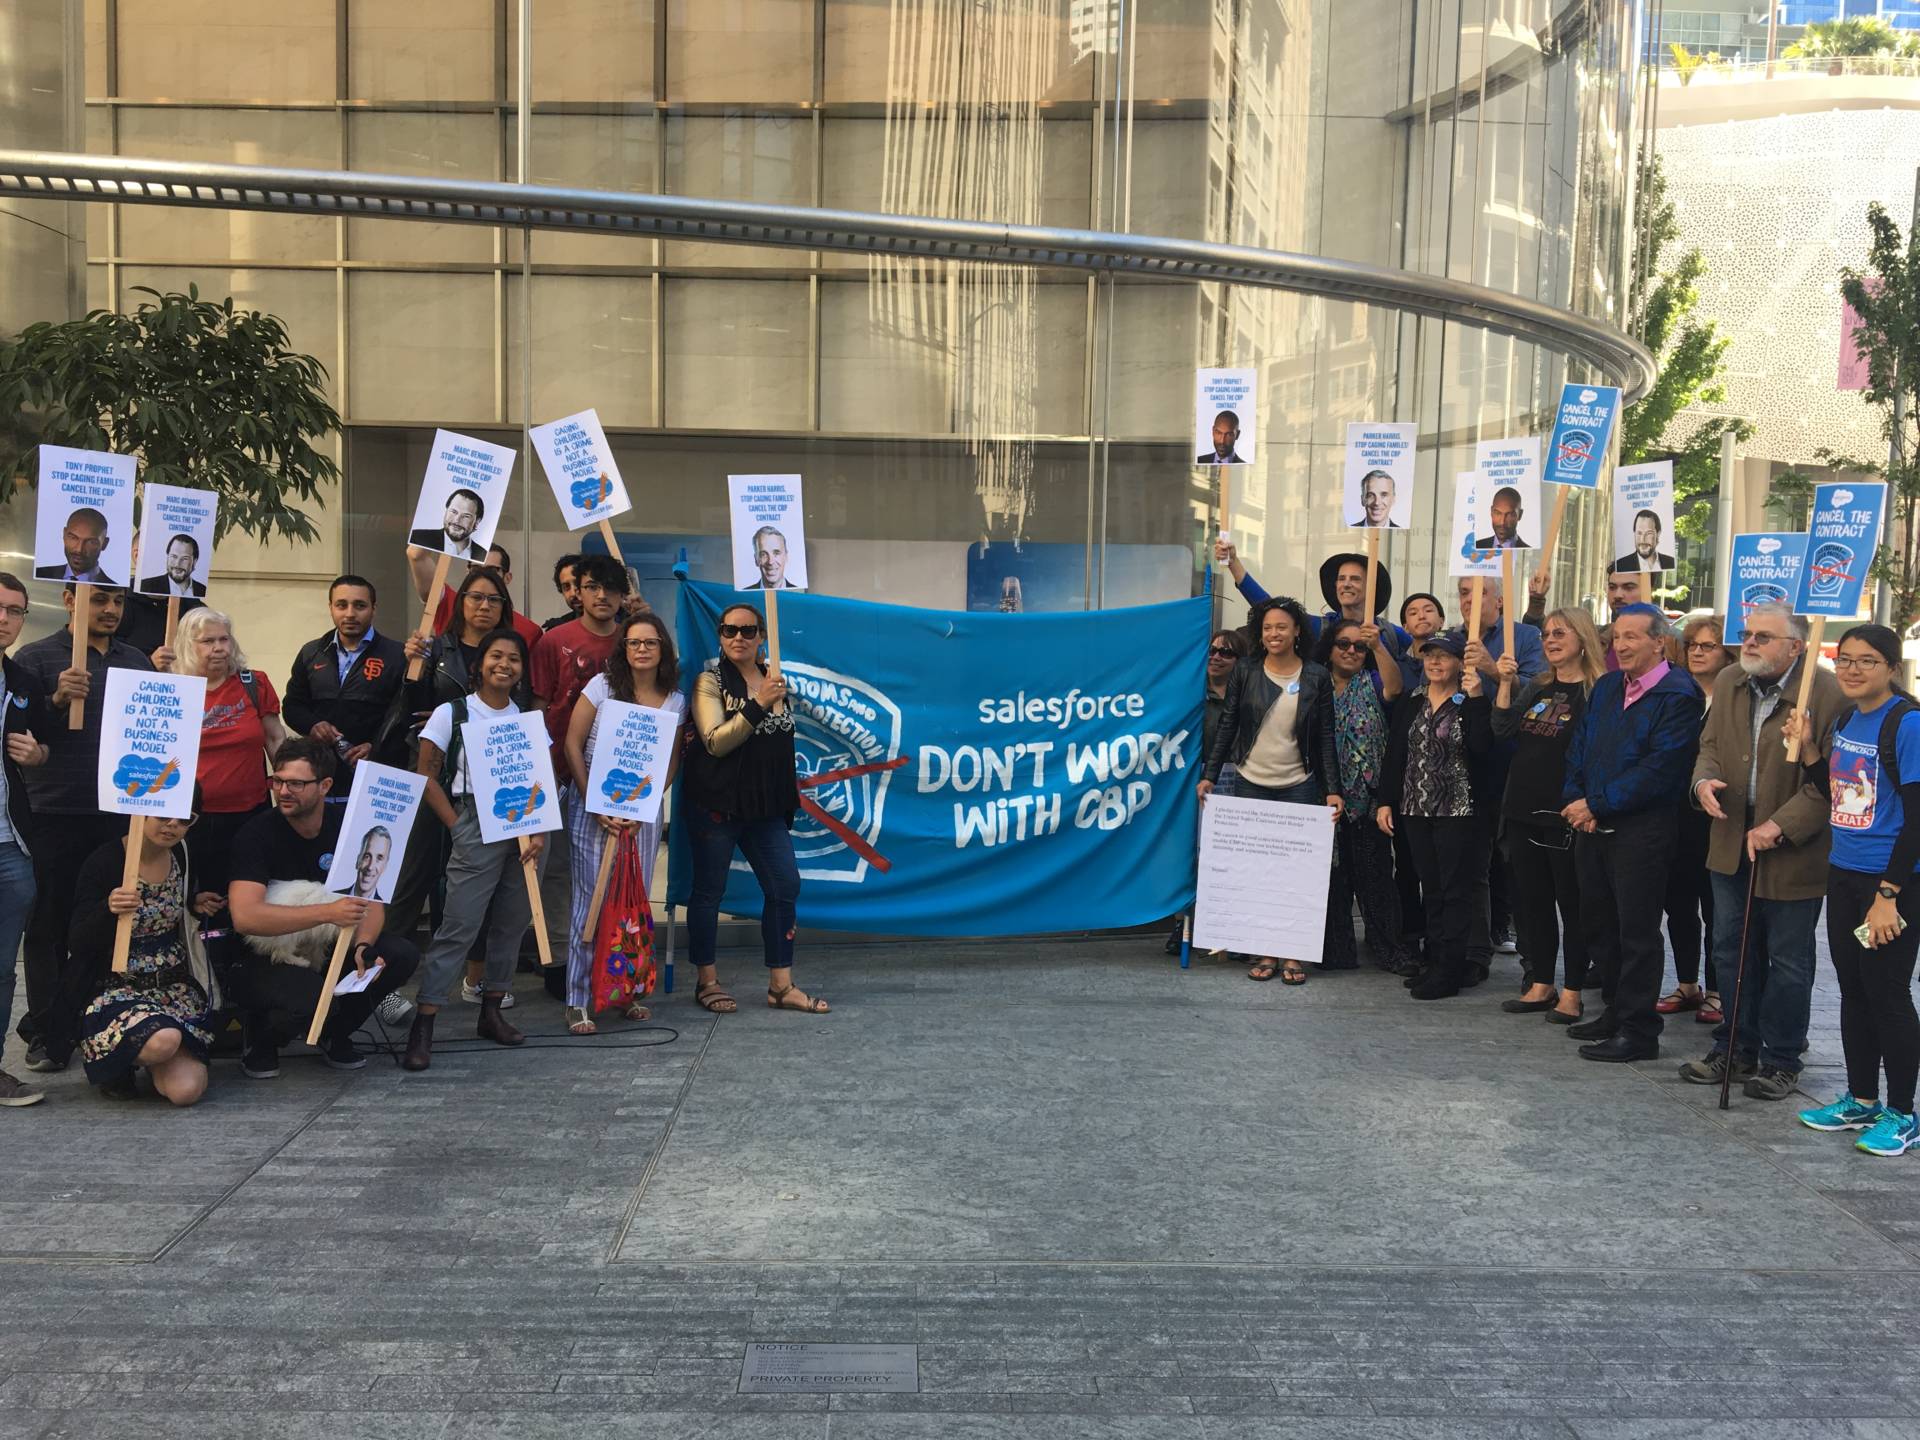 Those active in the Tech Workers Coalition came out to support Salesforce employees who are speaking out against the company. Sam Harnett/KQED